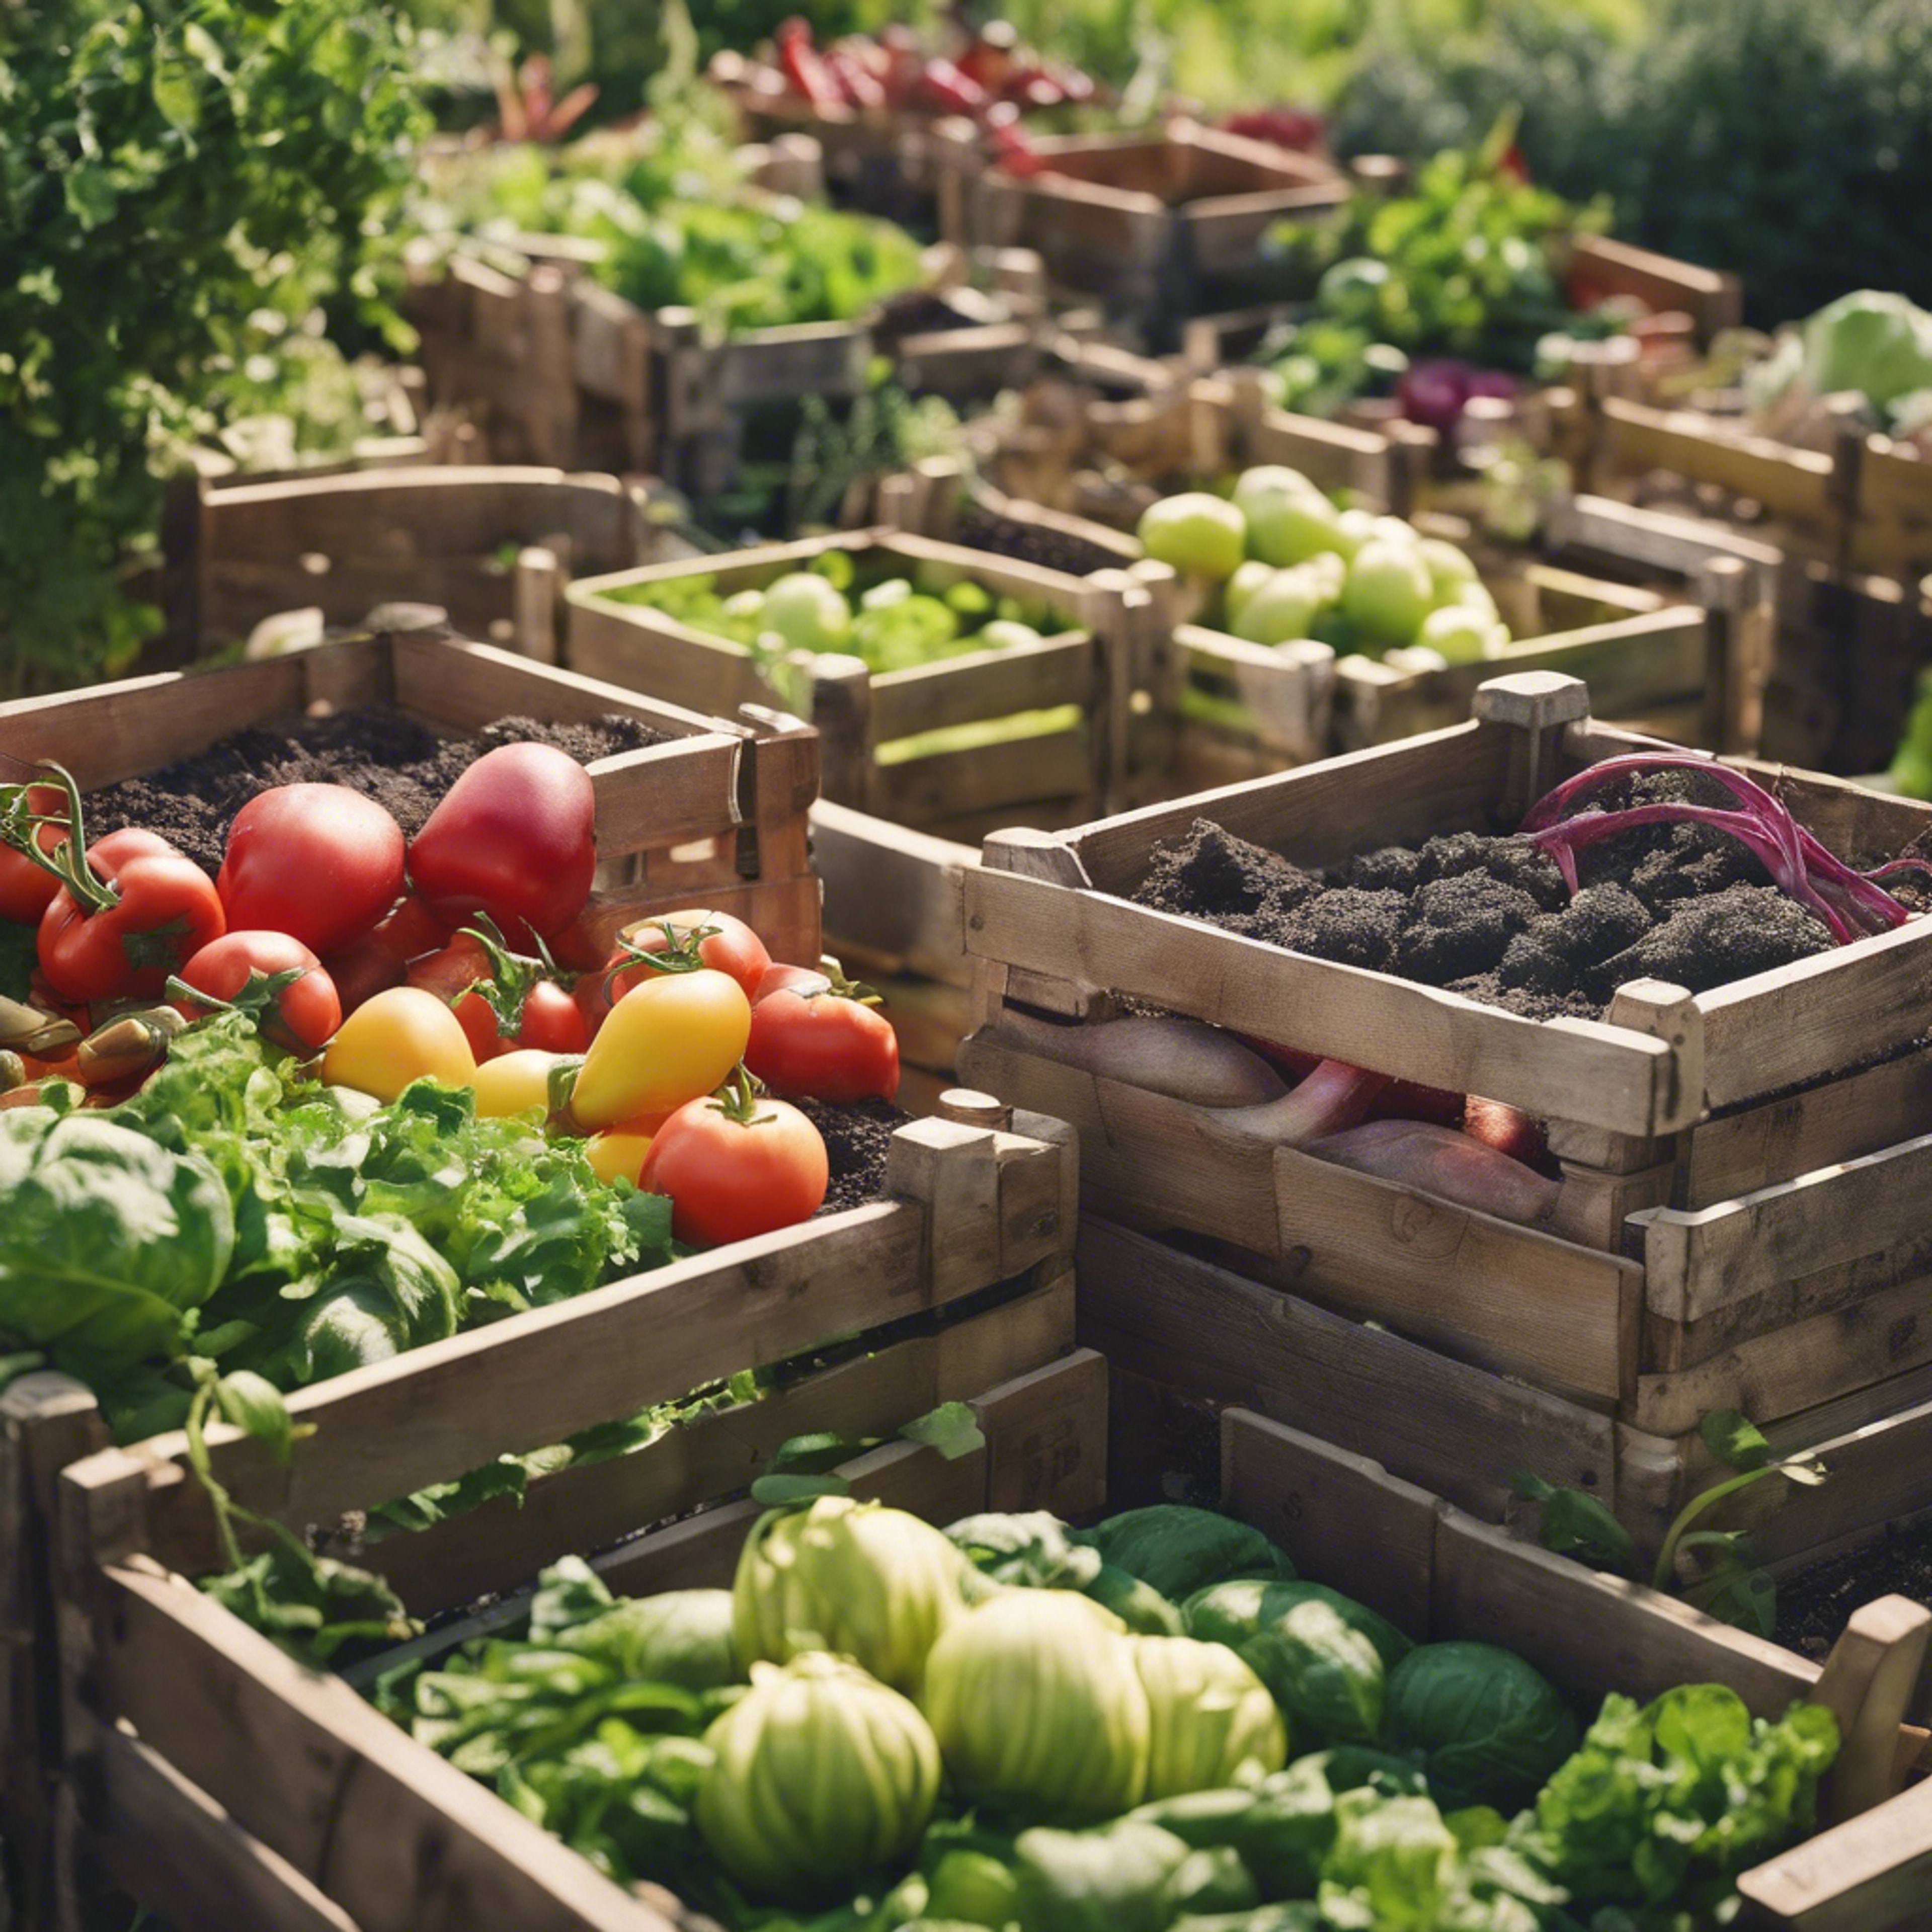 A vegetable garden, with a variety of rustic crates filled with vibrant produce.壁紙[a147ff0f0cdc4d90aa8b]